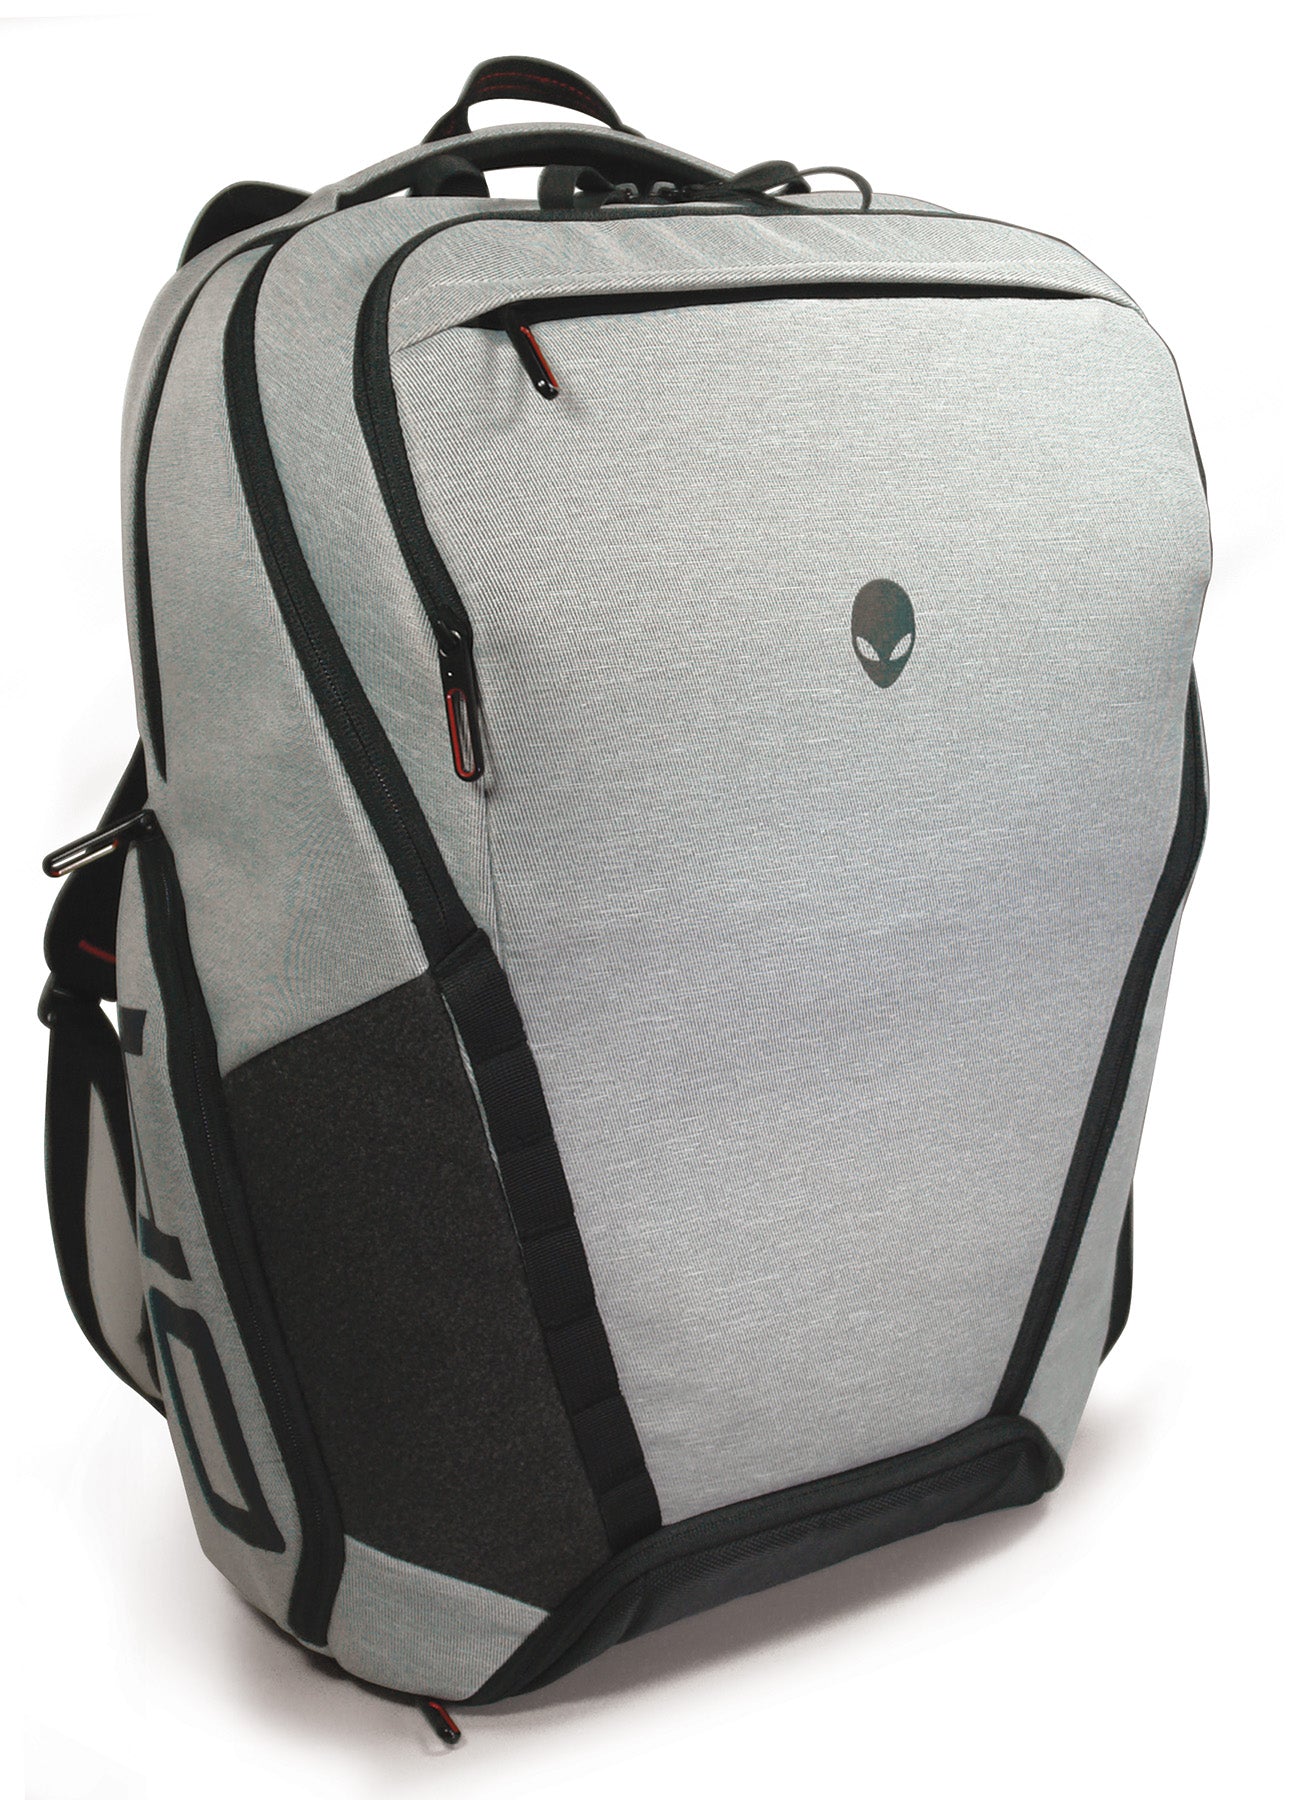 SPECIAL EDITION - Alienware Area-51m Elite Backpack 17 - White